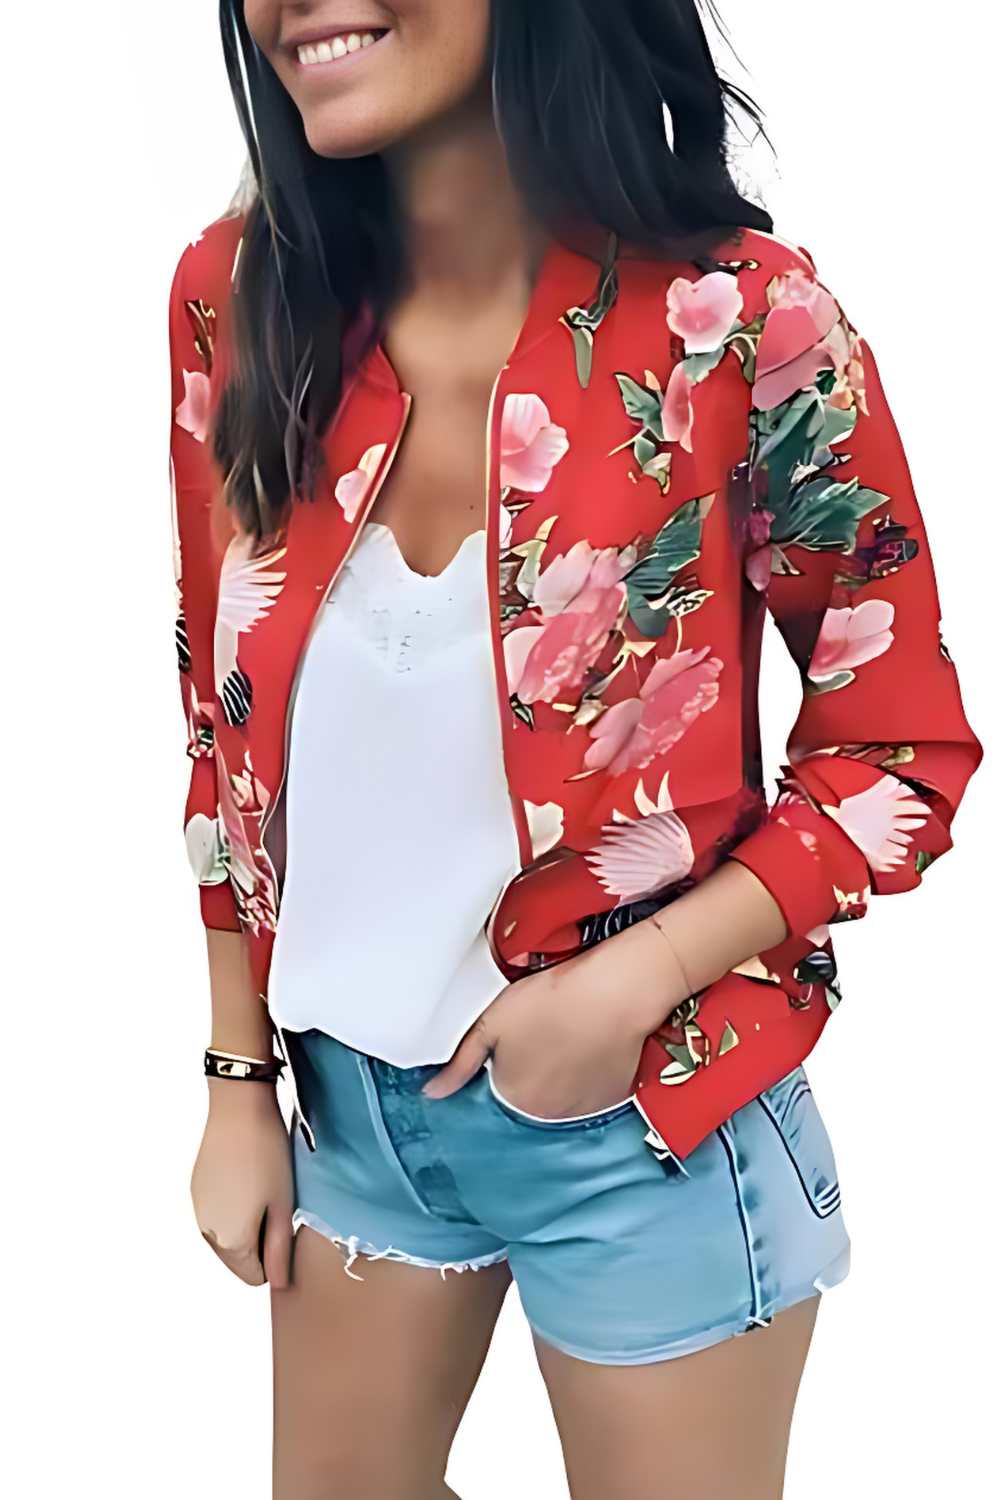 Women's Varsity Jacket - Floral Red - A.A.Y FASHION